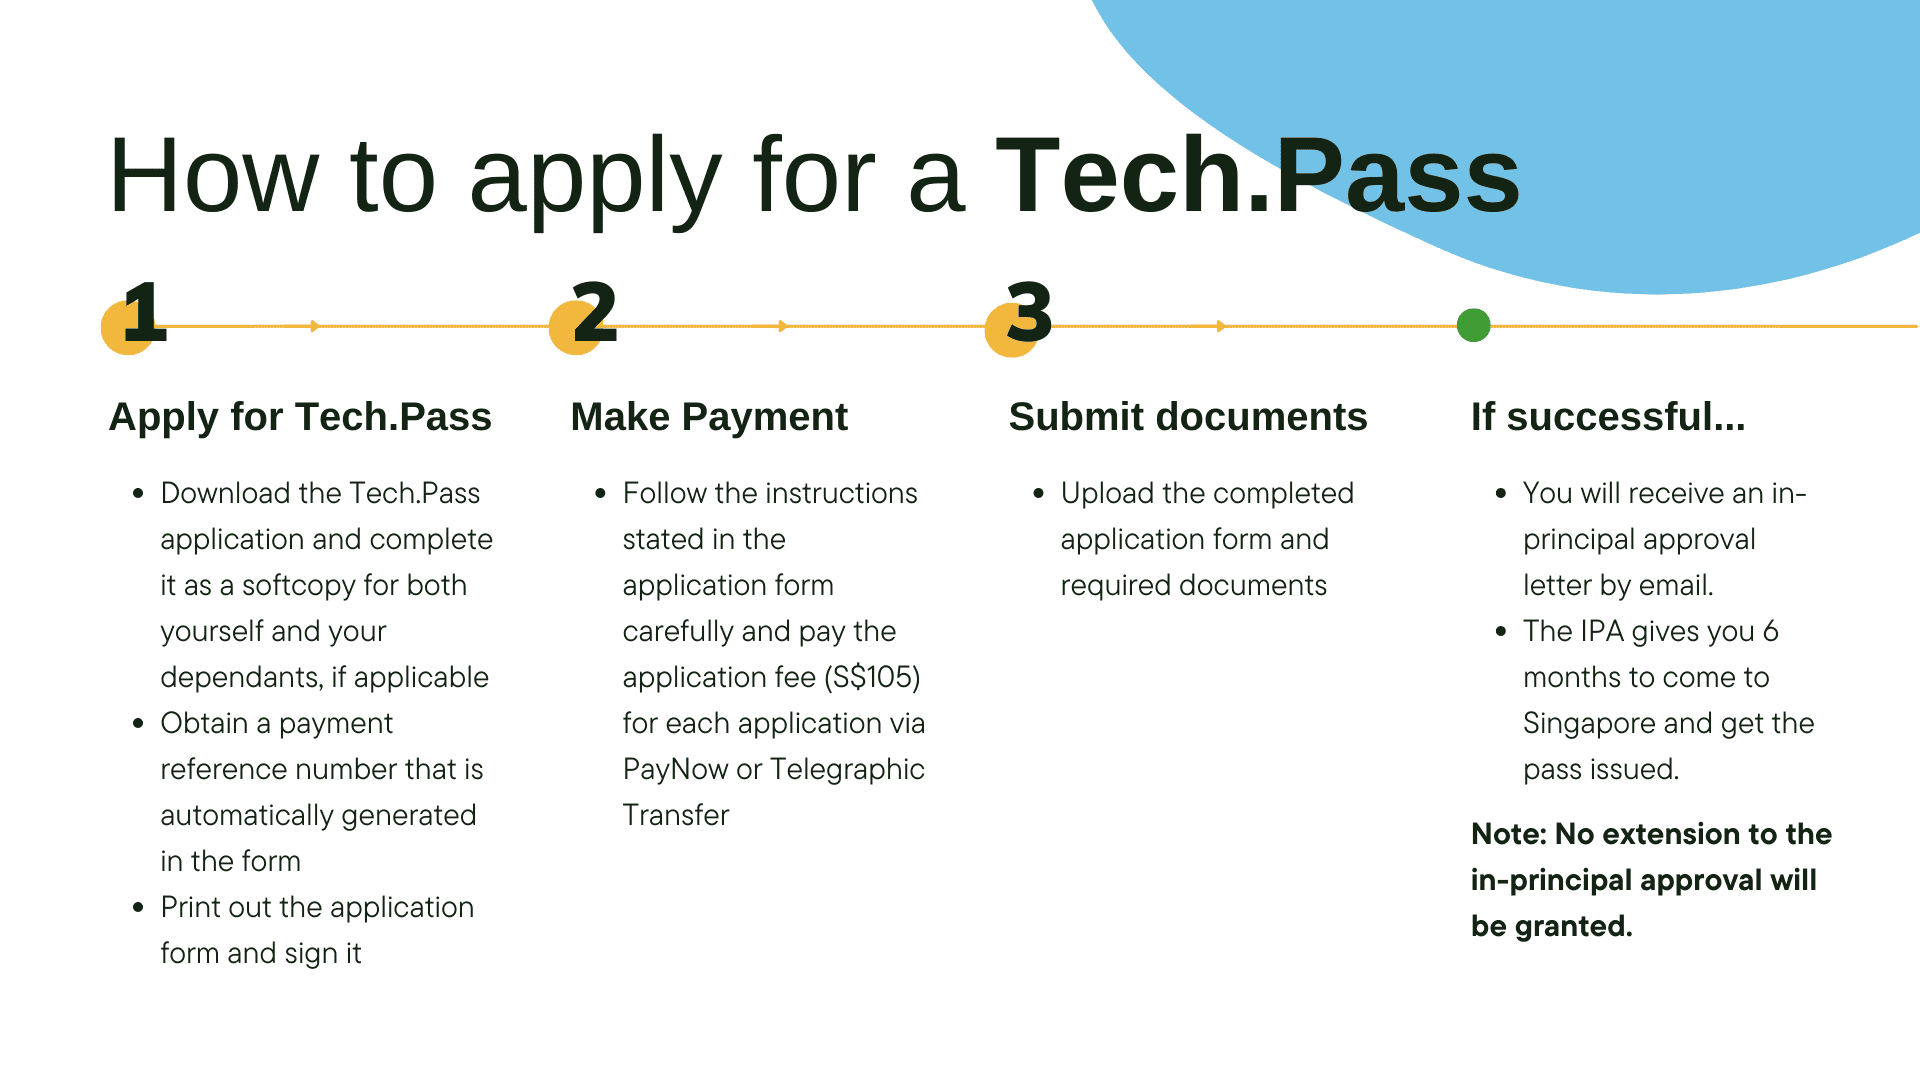 How to apply for a Tech.Pass